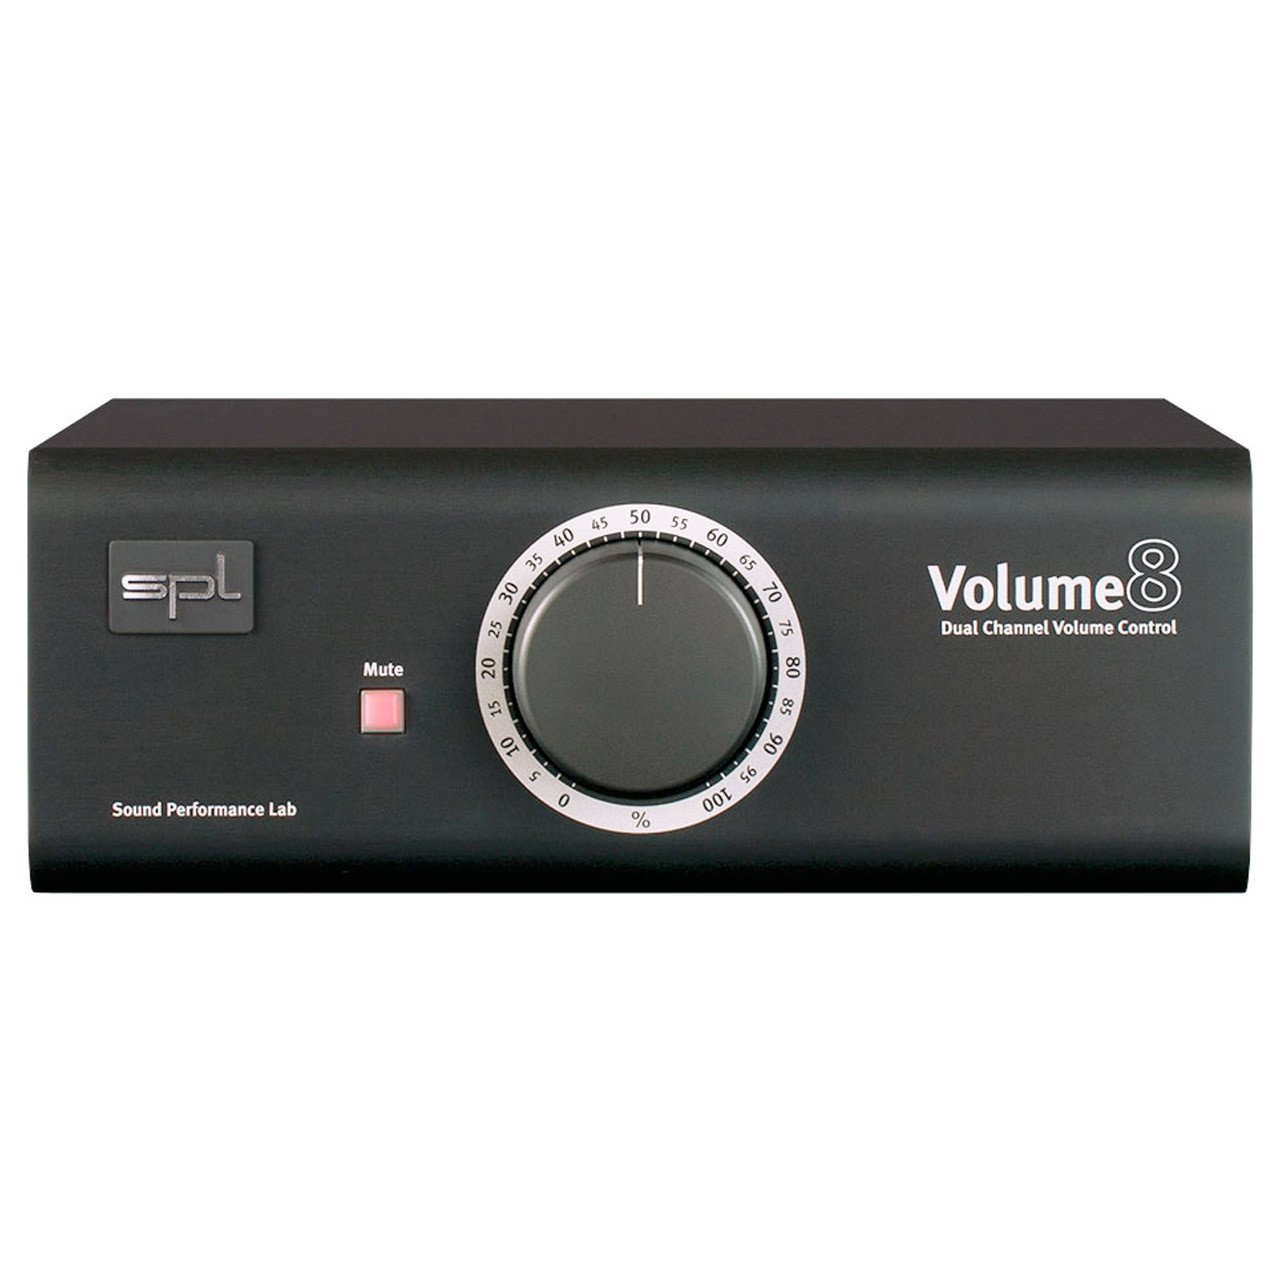 Monitor Controllers - SPL Volume 8 - 8-channel Volume Controller